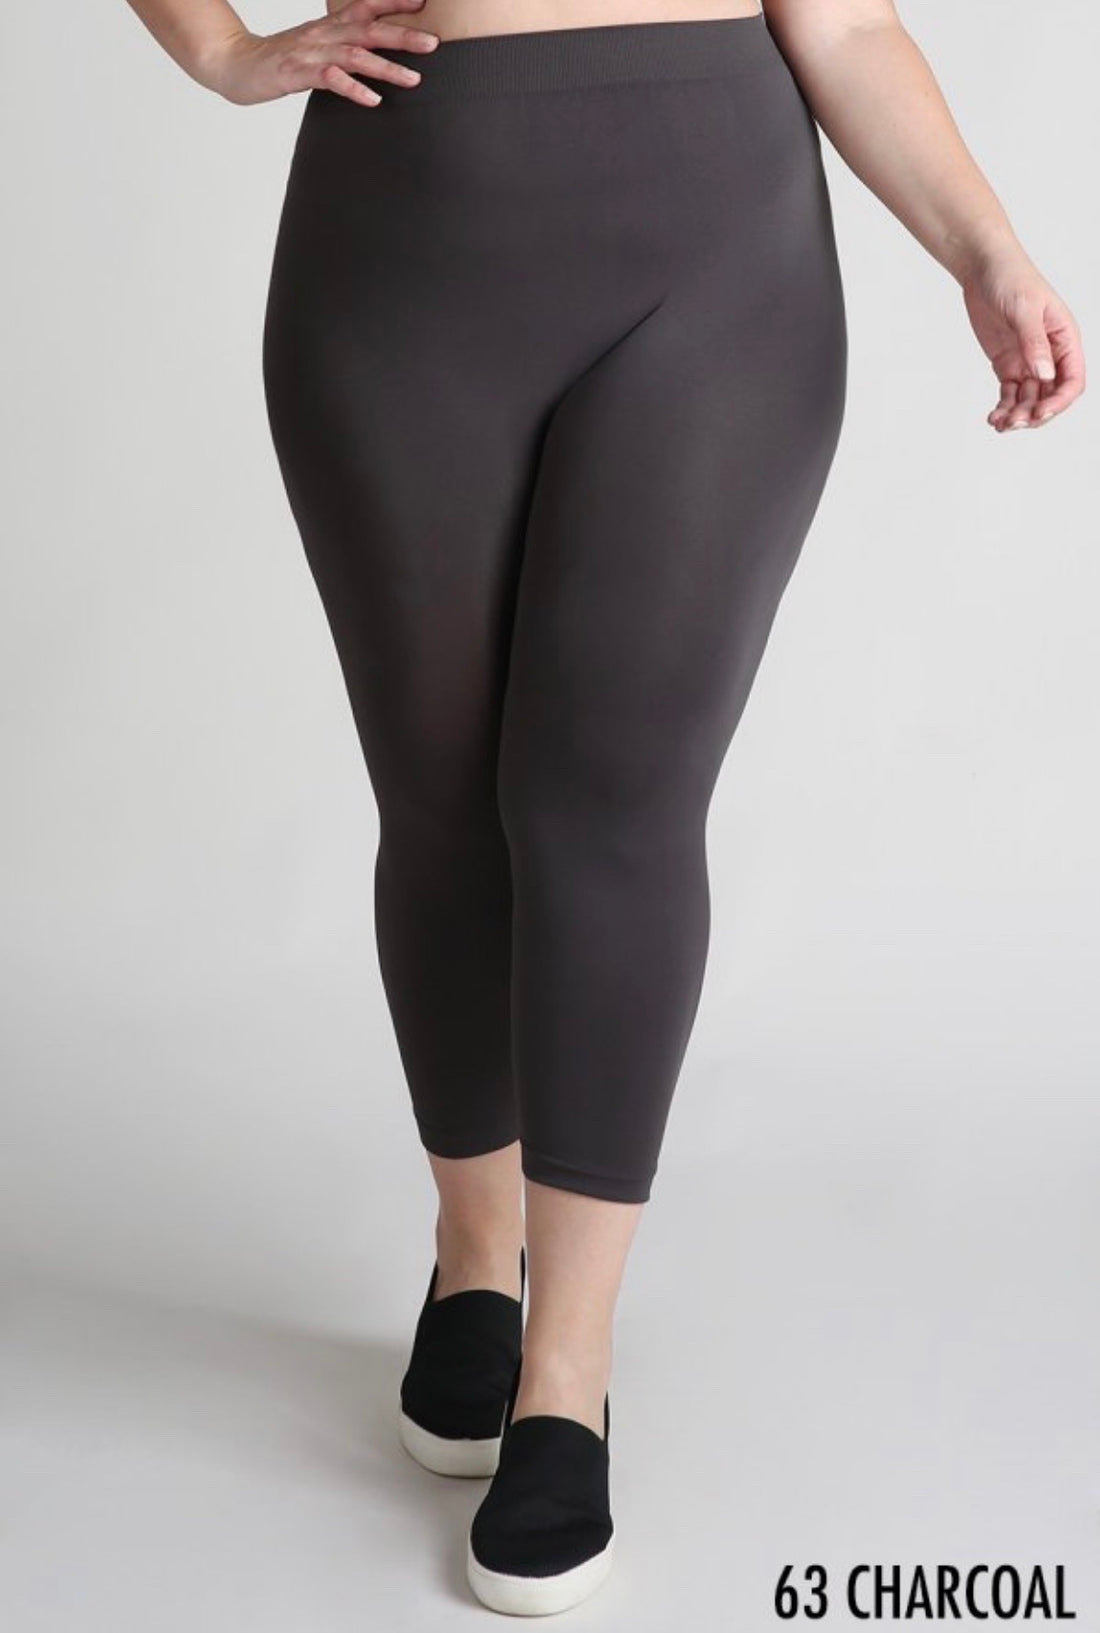 One Size Fits All Petite (Capri) Legging – The Shoppe at Coldwater